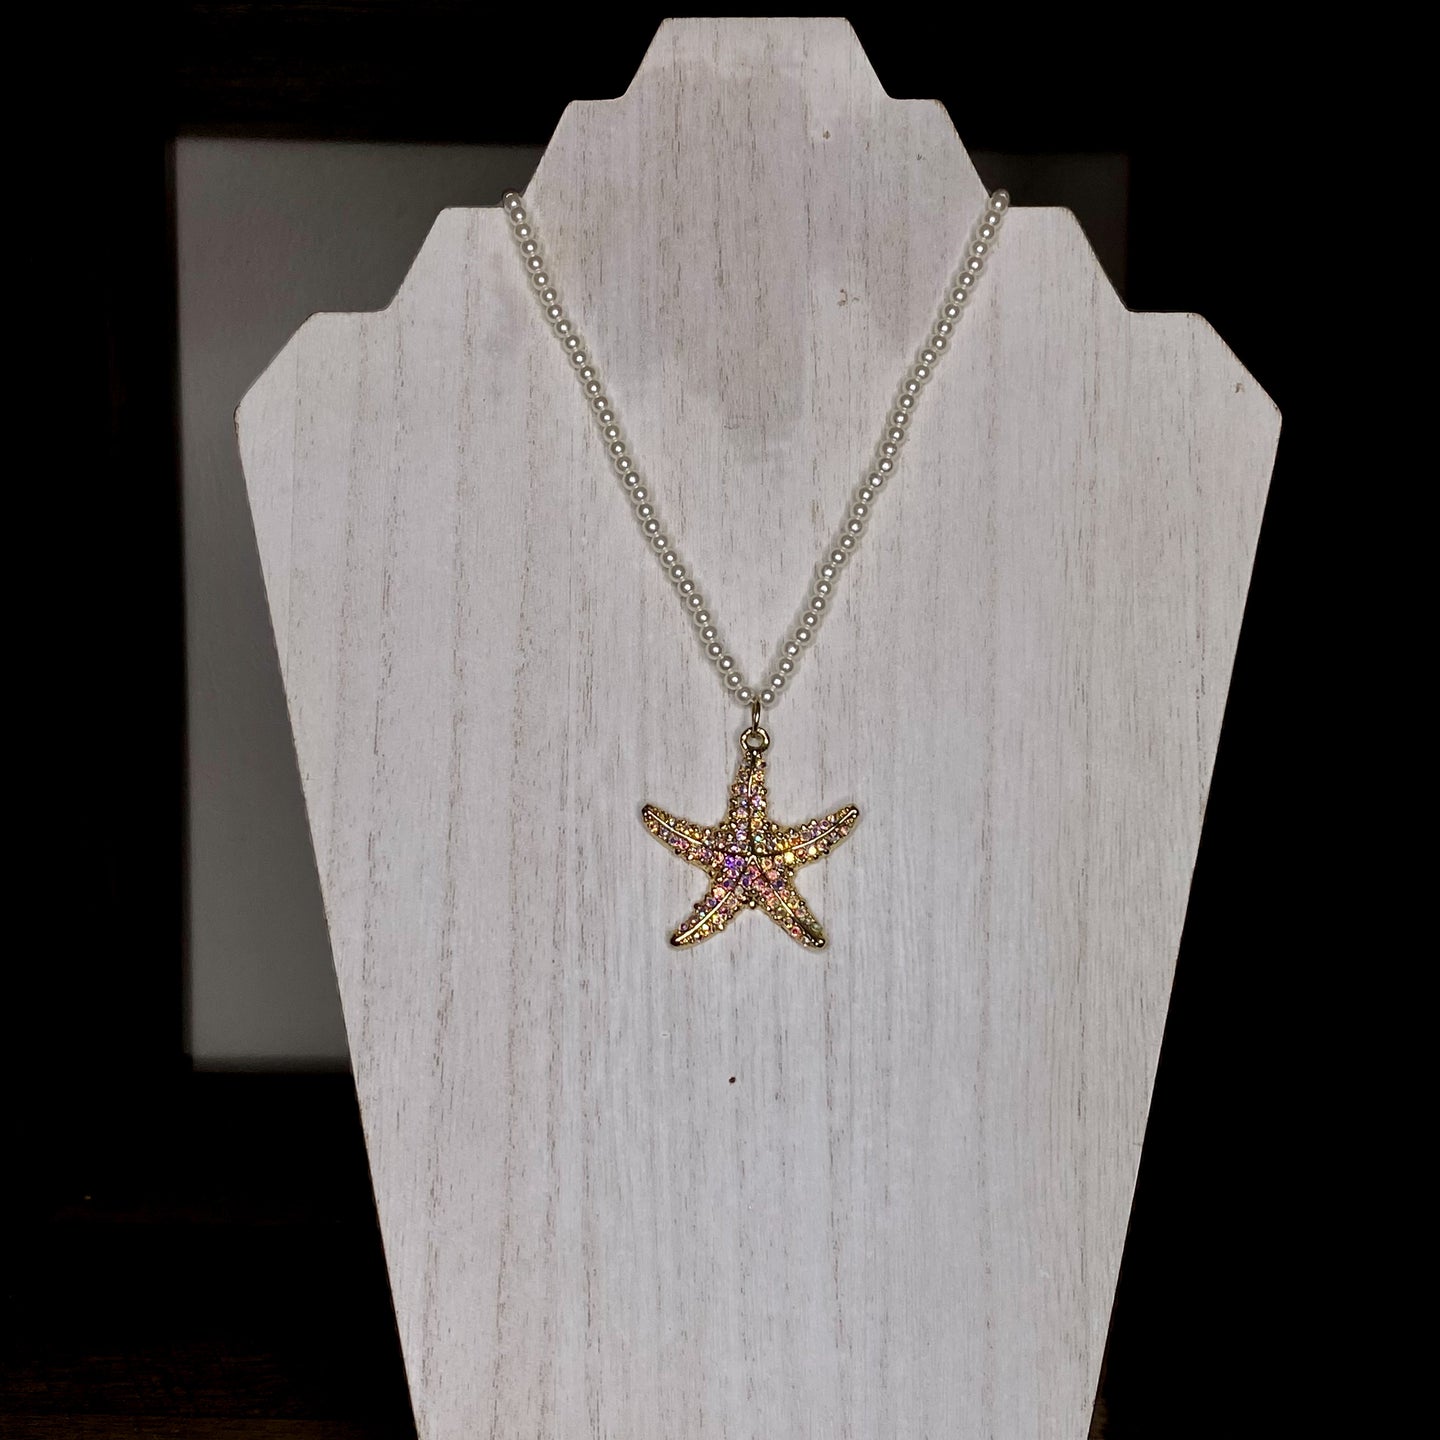 PEARLS AND STAR NECKLACE